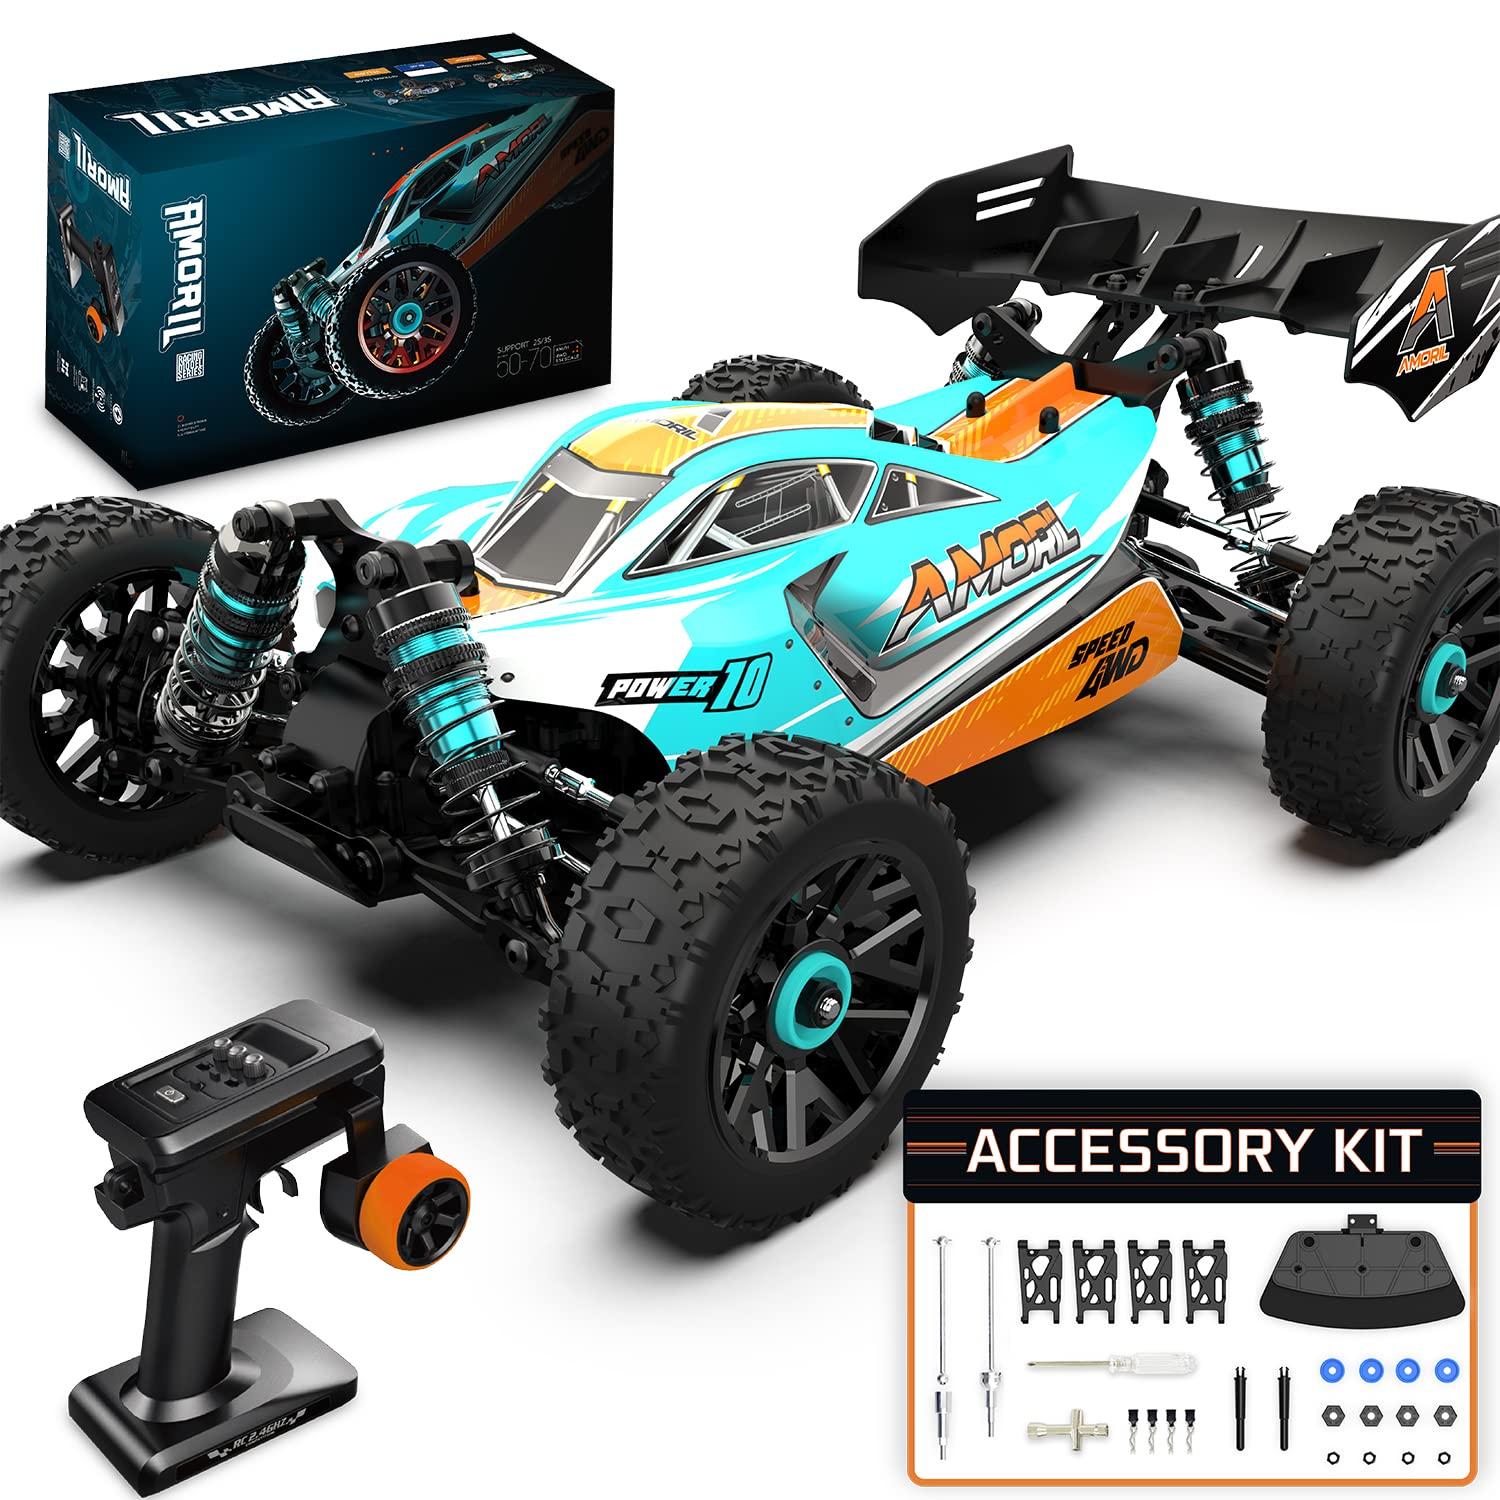 Remote Control Car Under 300 Amazon: Key Considerations for Finding the Best Budget RC Car on Amazon